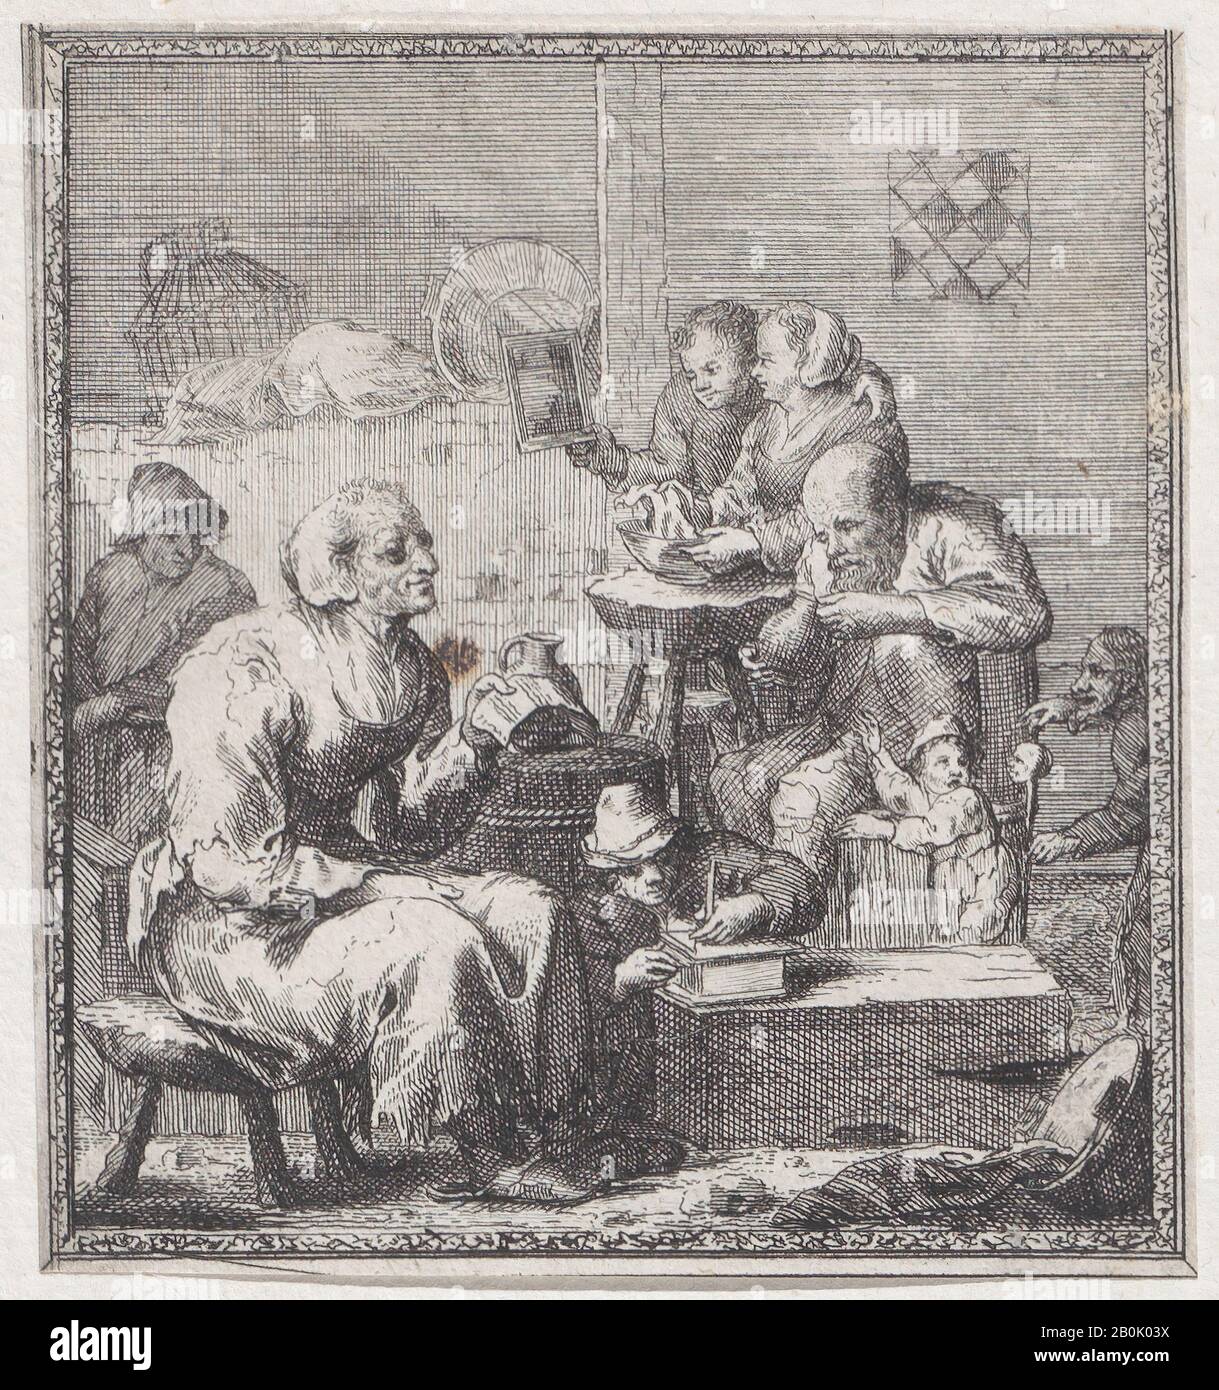 Jacques Dassonville, Eight peasants in a rustic interior, Jacques ...